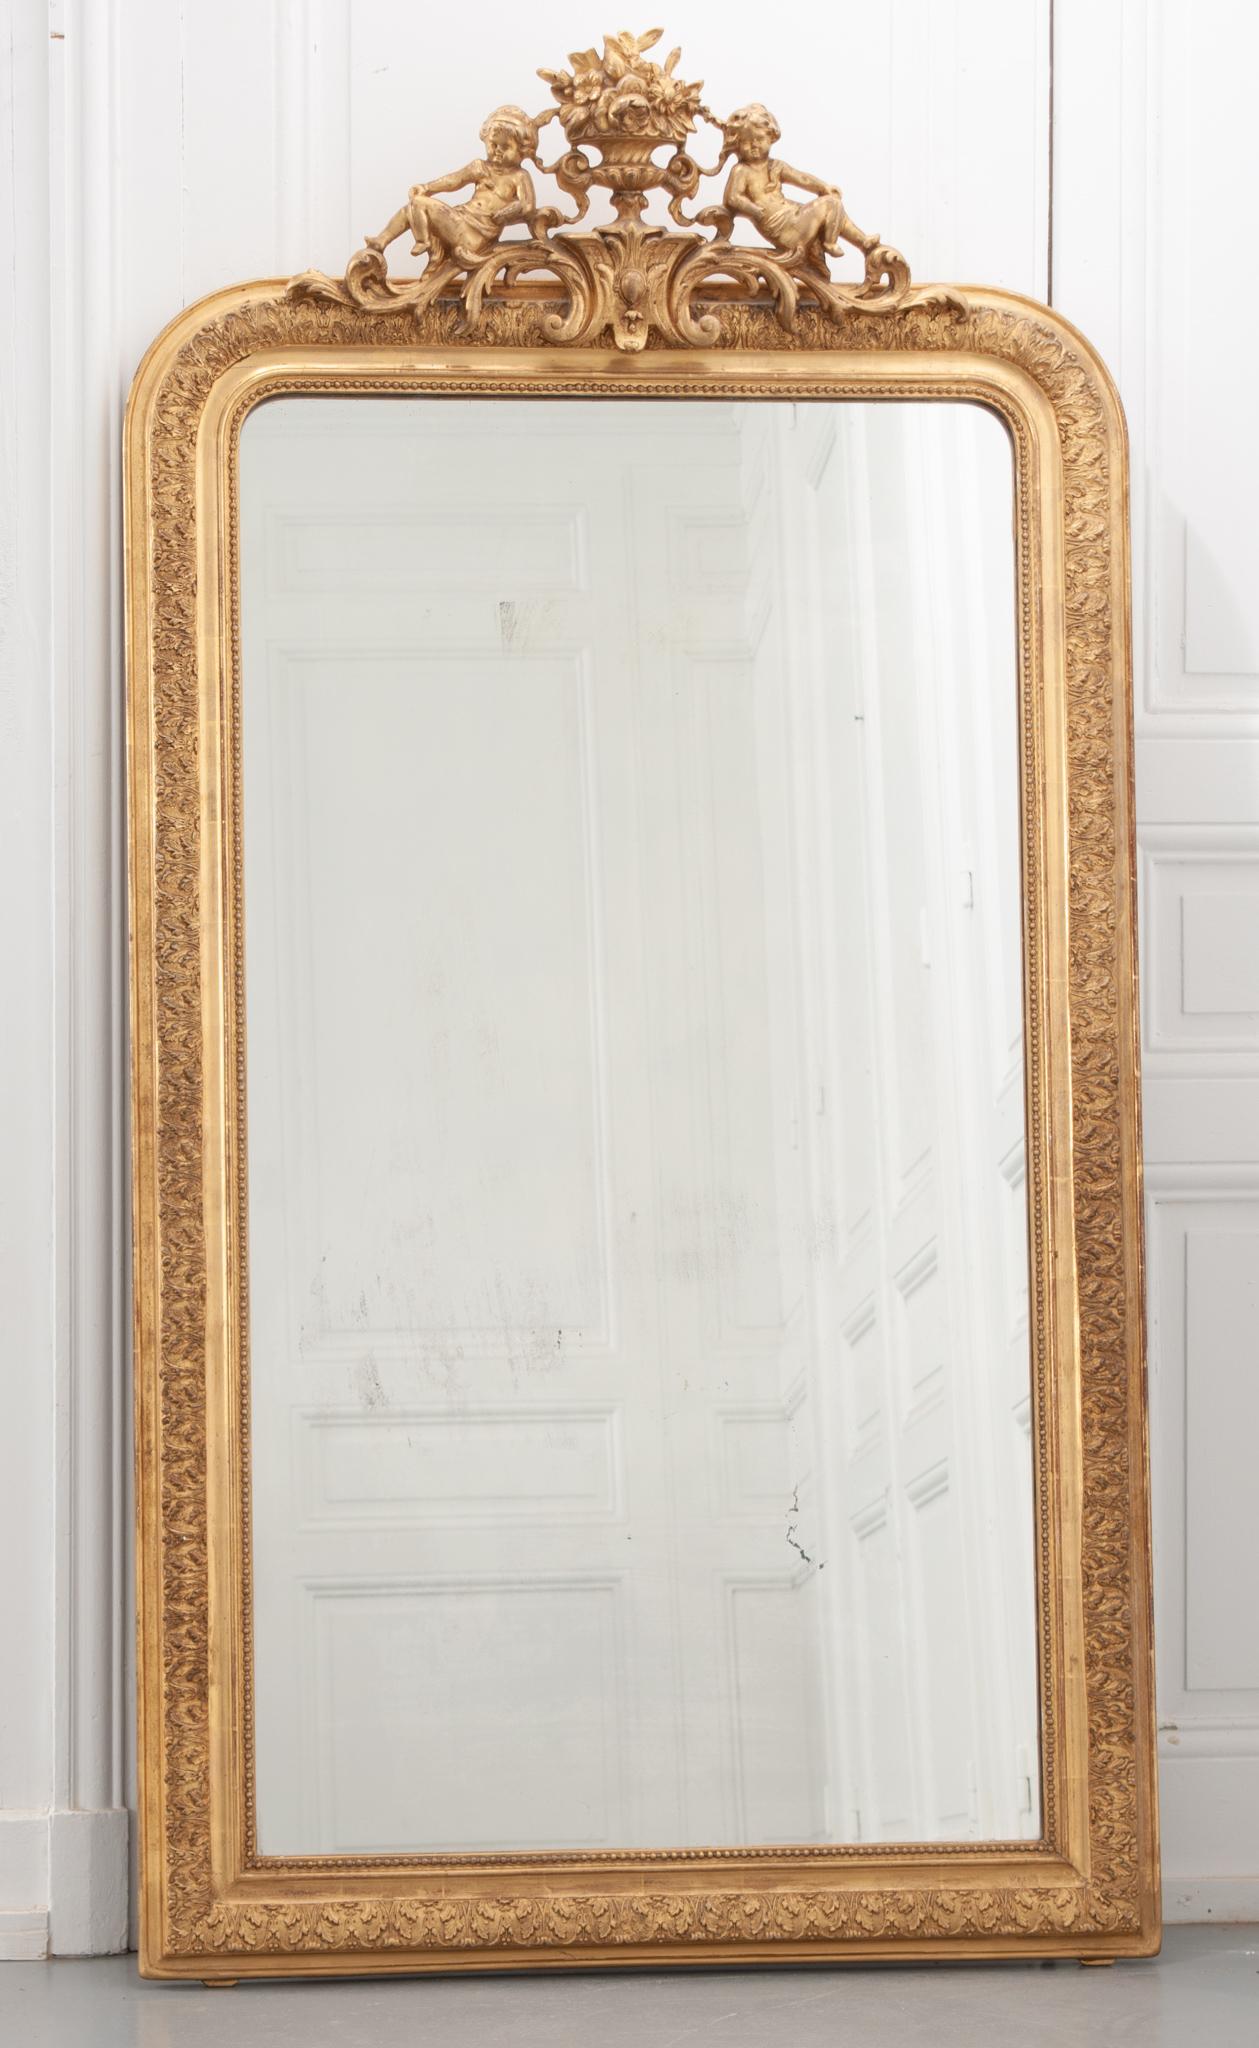 This is a French 19th century Louis Philippe style gold gilt mirror with a crest. It has its original mirror plate with some aging and foxing. There is a leaf motif all around the border. The crest has two cherubs, one on either side of a basket of